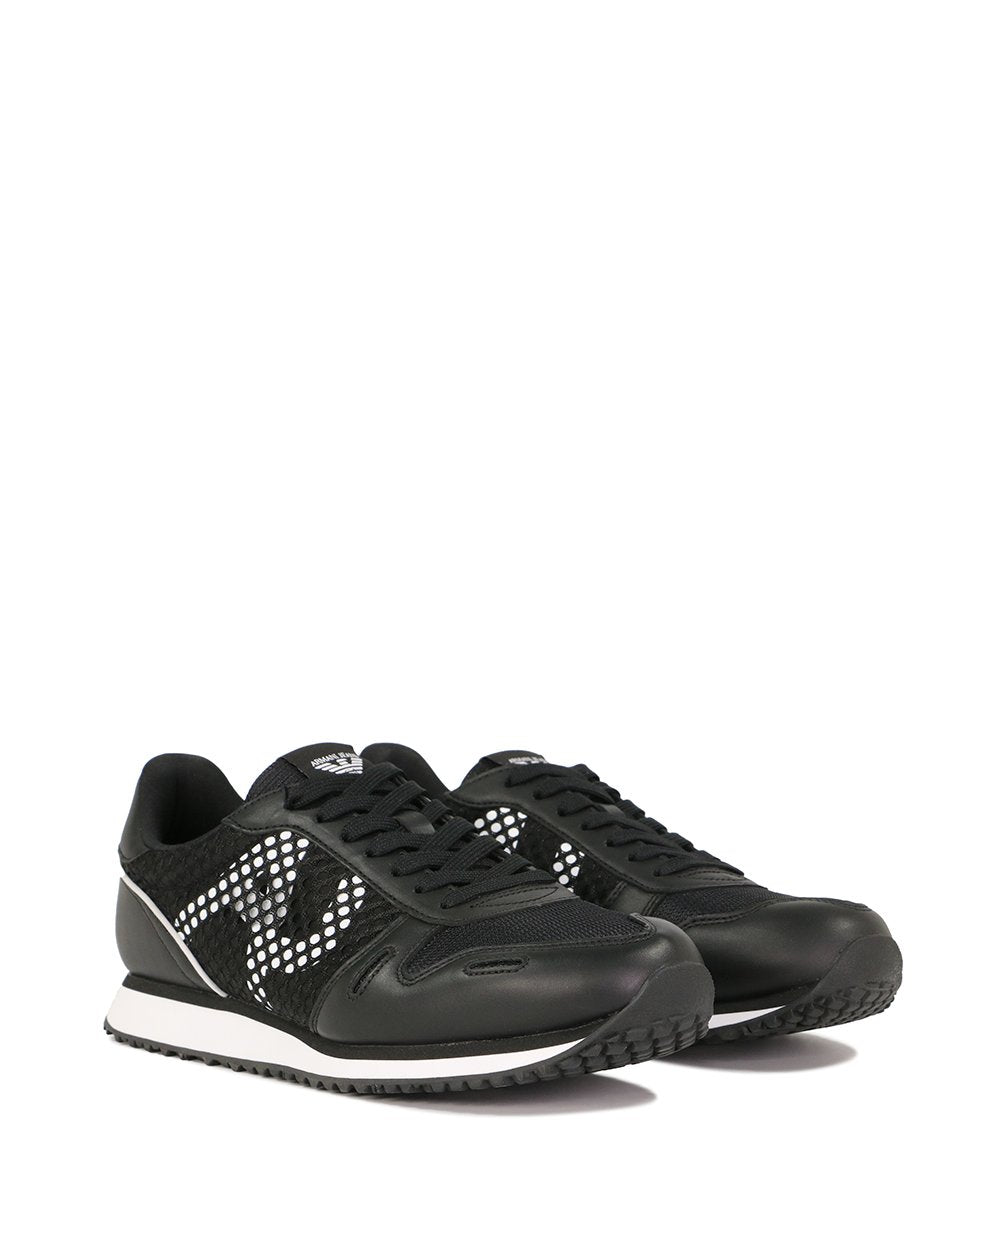 AJ Mesh Printed Sneakers - ISSI Outlet